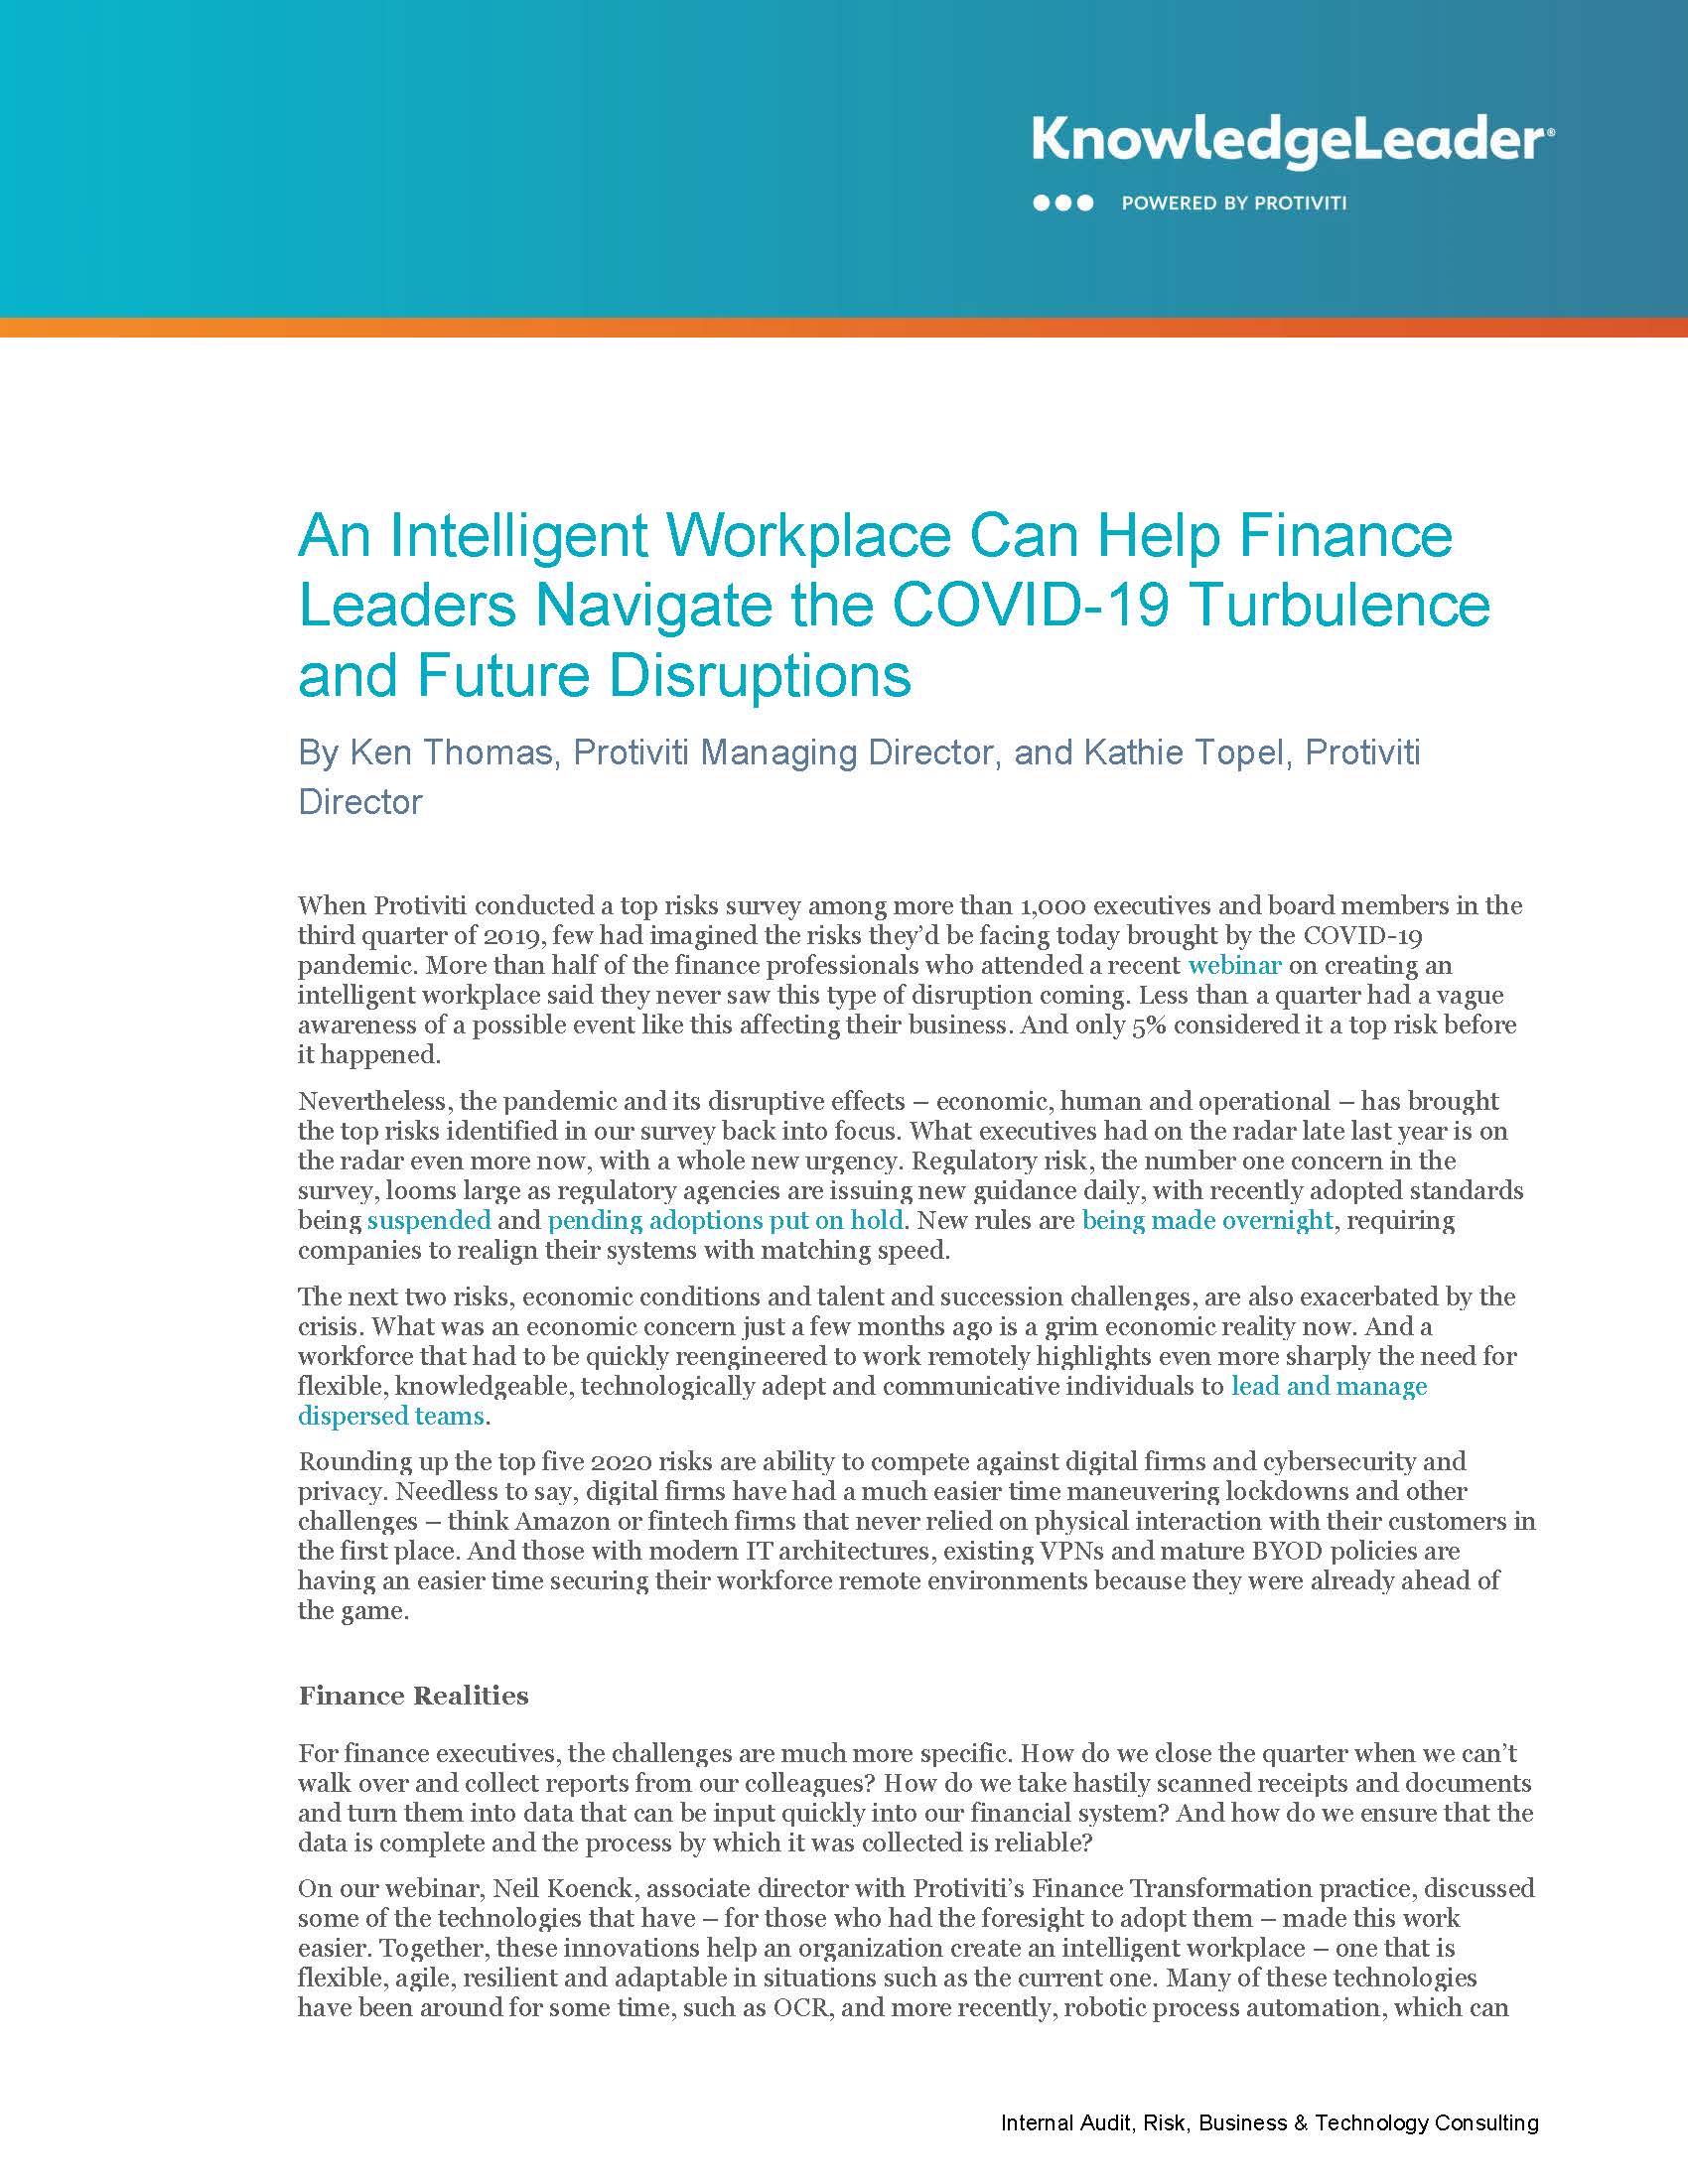 Screenshot of the first page of (An Intelligent Workplace Can Help Finance Leaders Navigate the COVID-19 Turbulence and Future Disruptions)